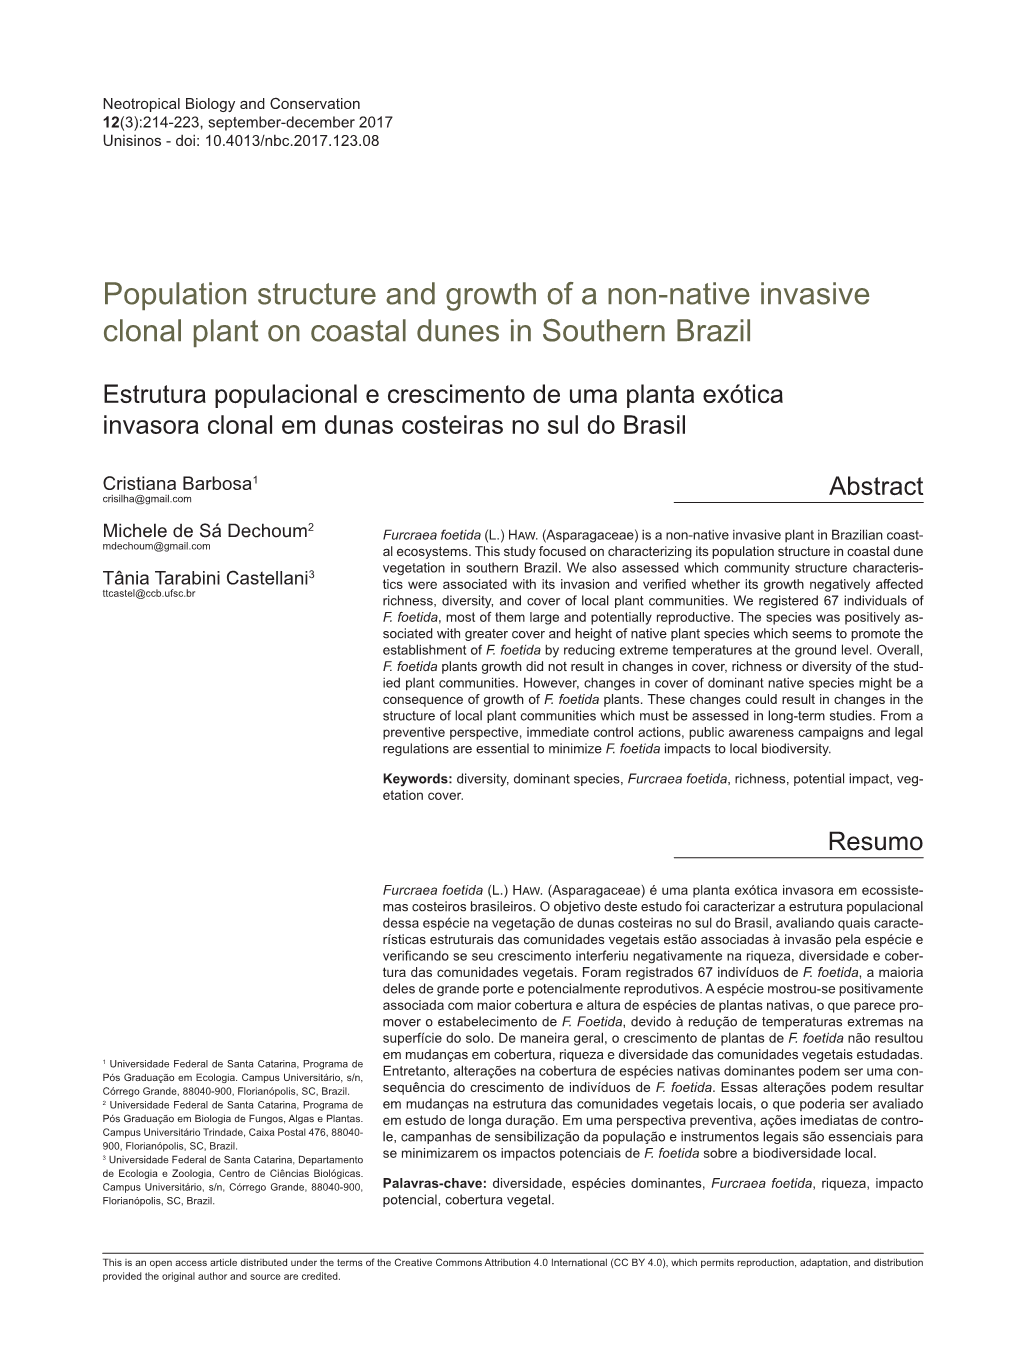 Population Structure and Growth of a Non-Native Invasive Clonal Plant on Coastal Dunes in Southern Brazil